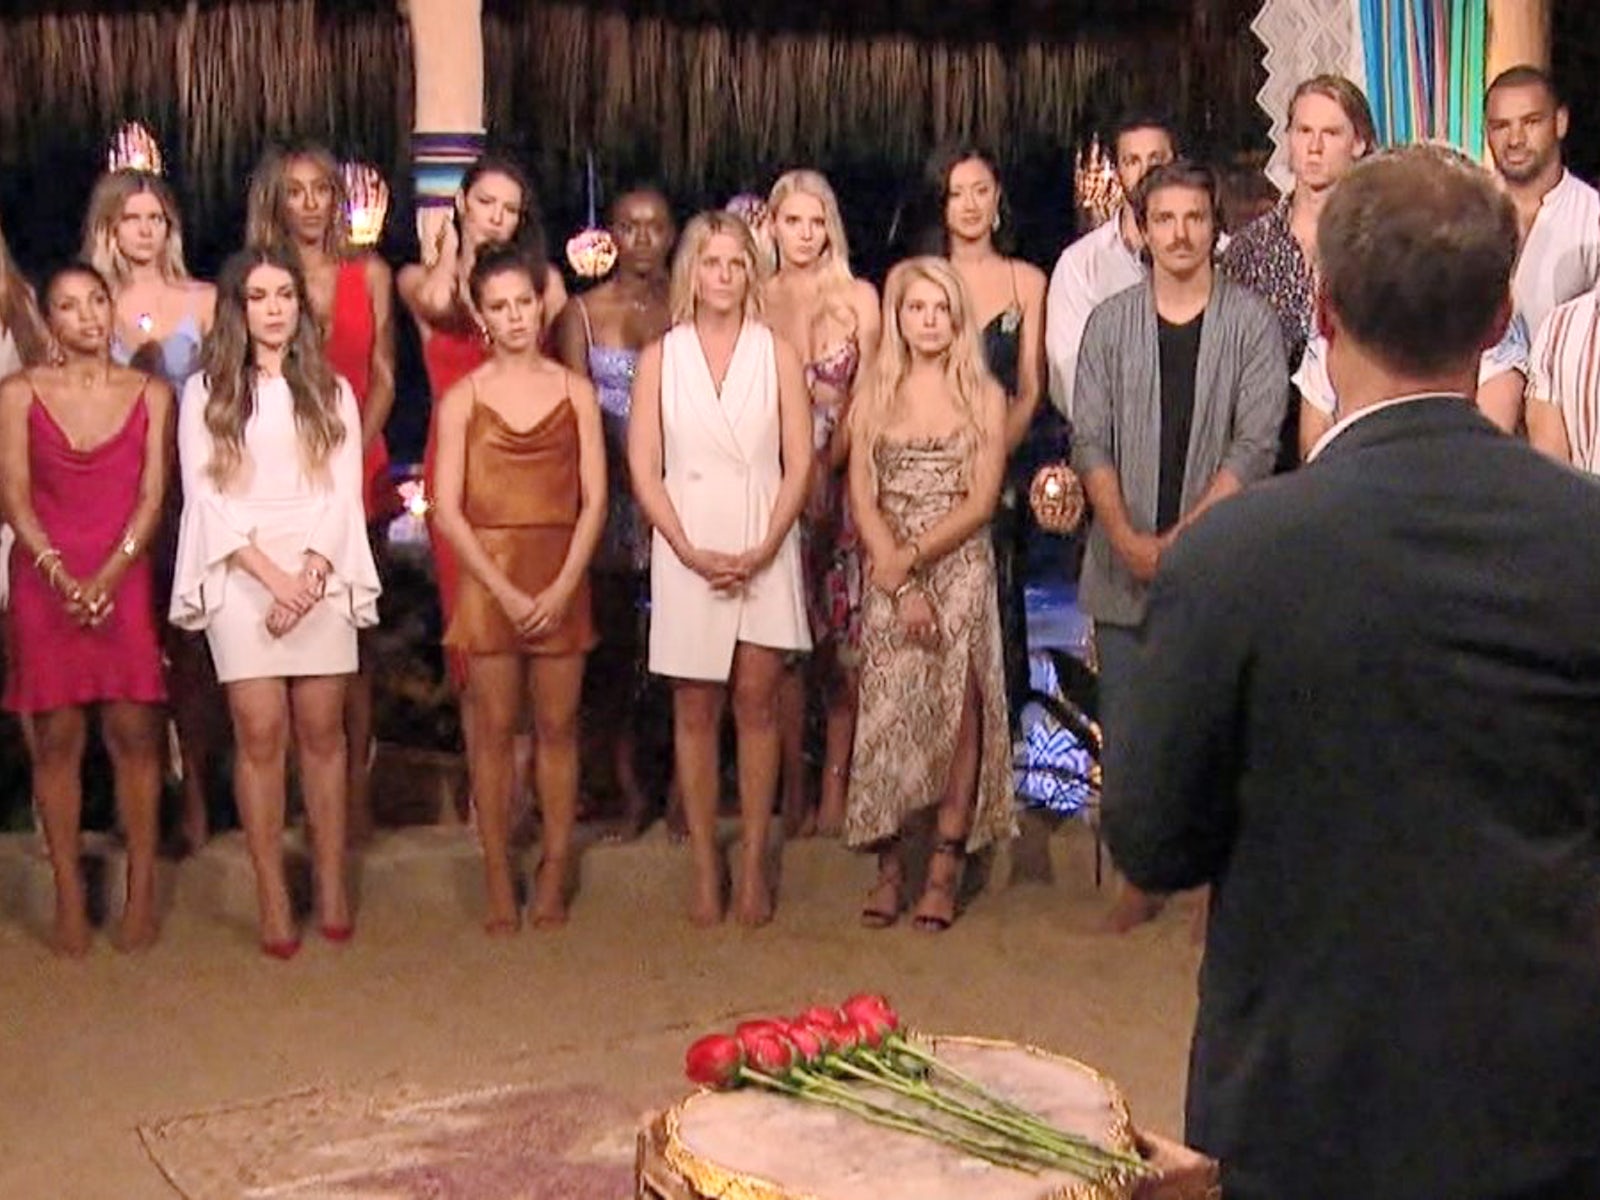 'Bachelor in Paradise' spoilers Who got engaged or stayed together in